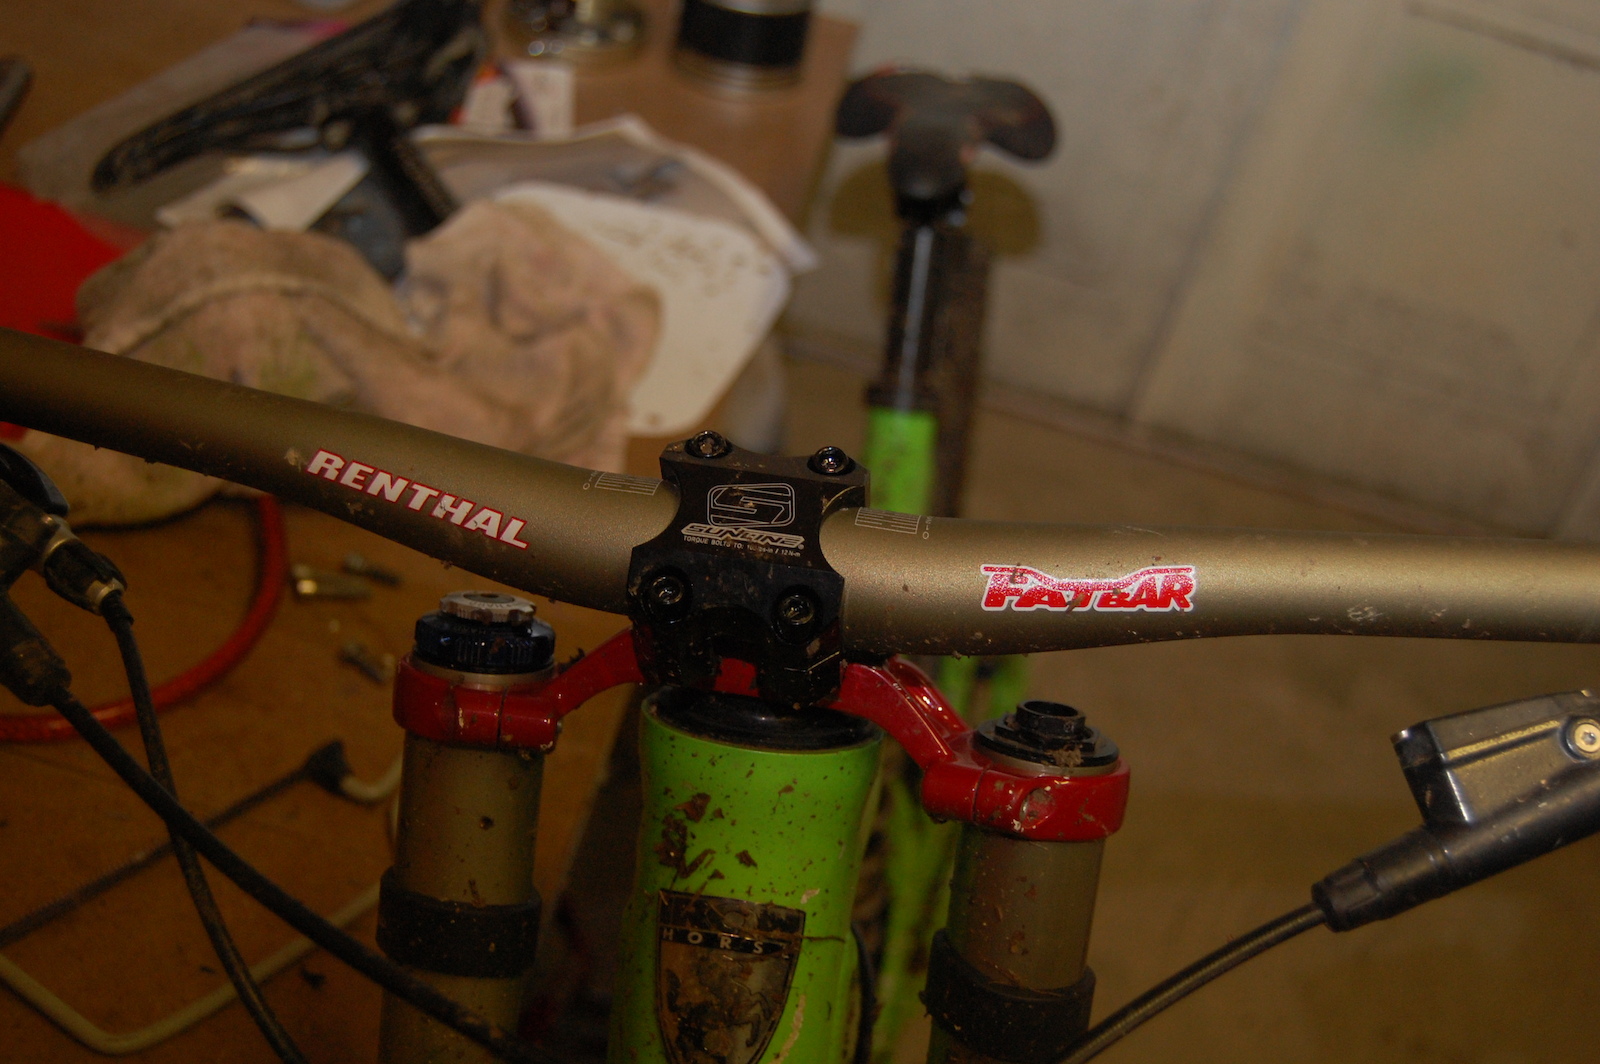 finaly got ride of my 700mm fun bars and put a pair of renthal fatboys 80mm bars on and a sunline direct mount boxxer stem on